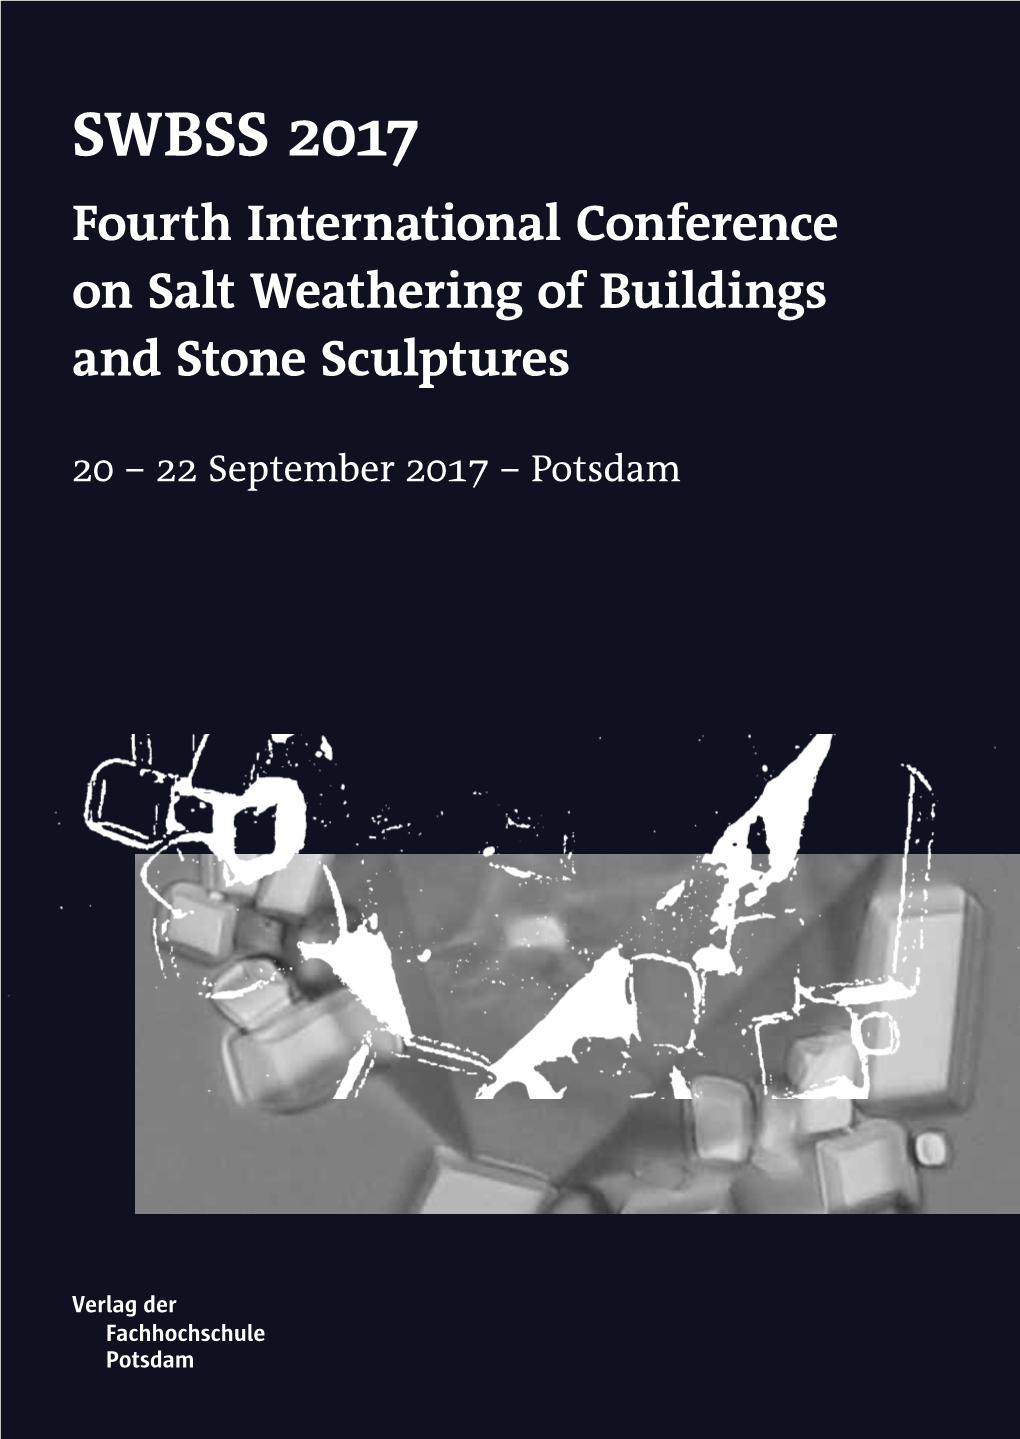 SWBSS 2017 Fourth International Conference on Salt Weathering of Buildings and Stone Sculptures